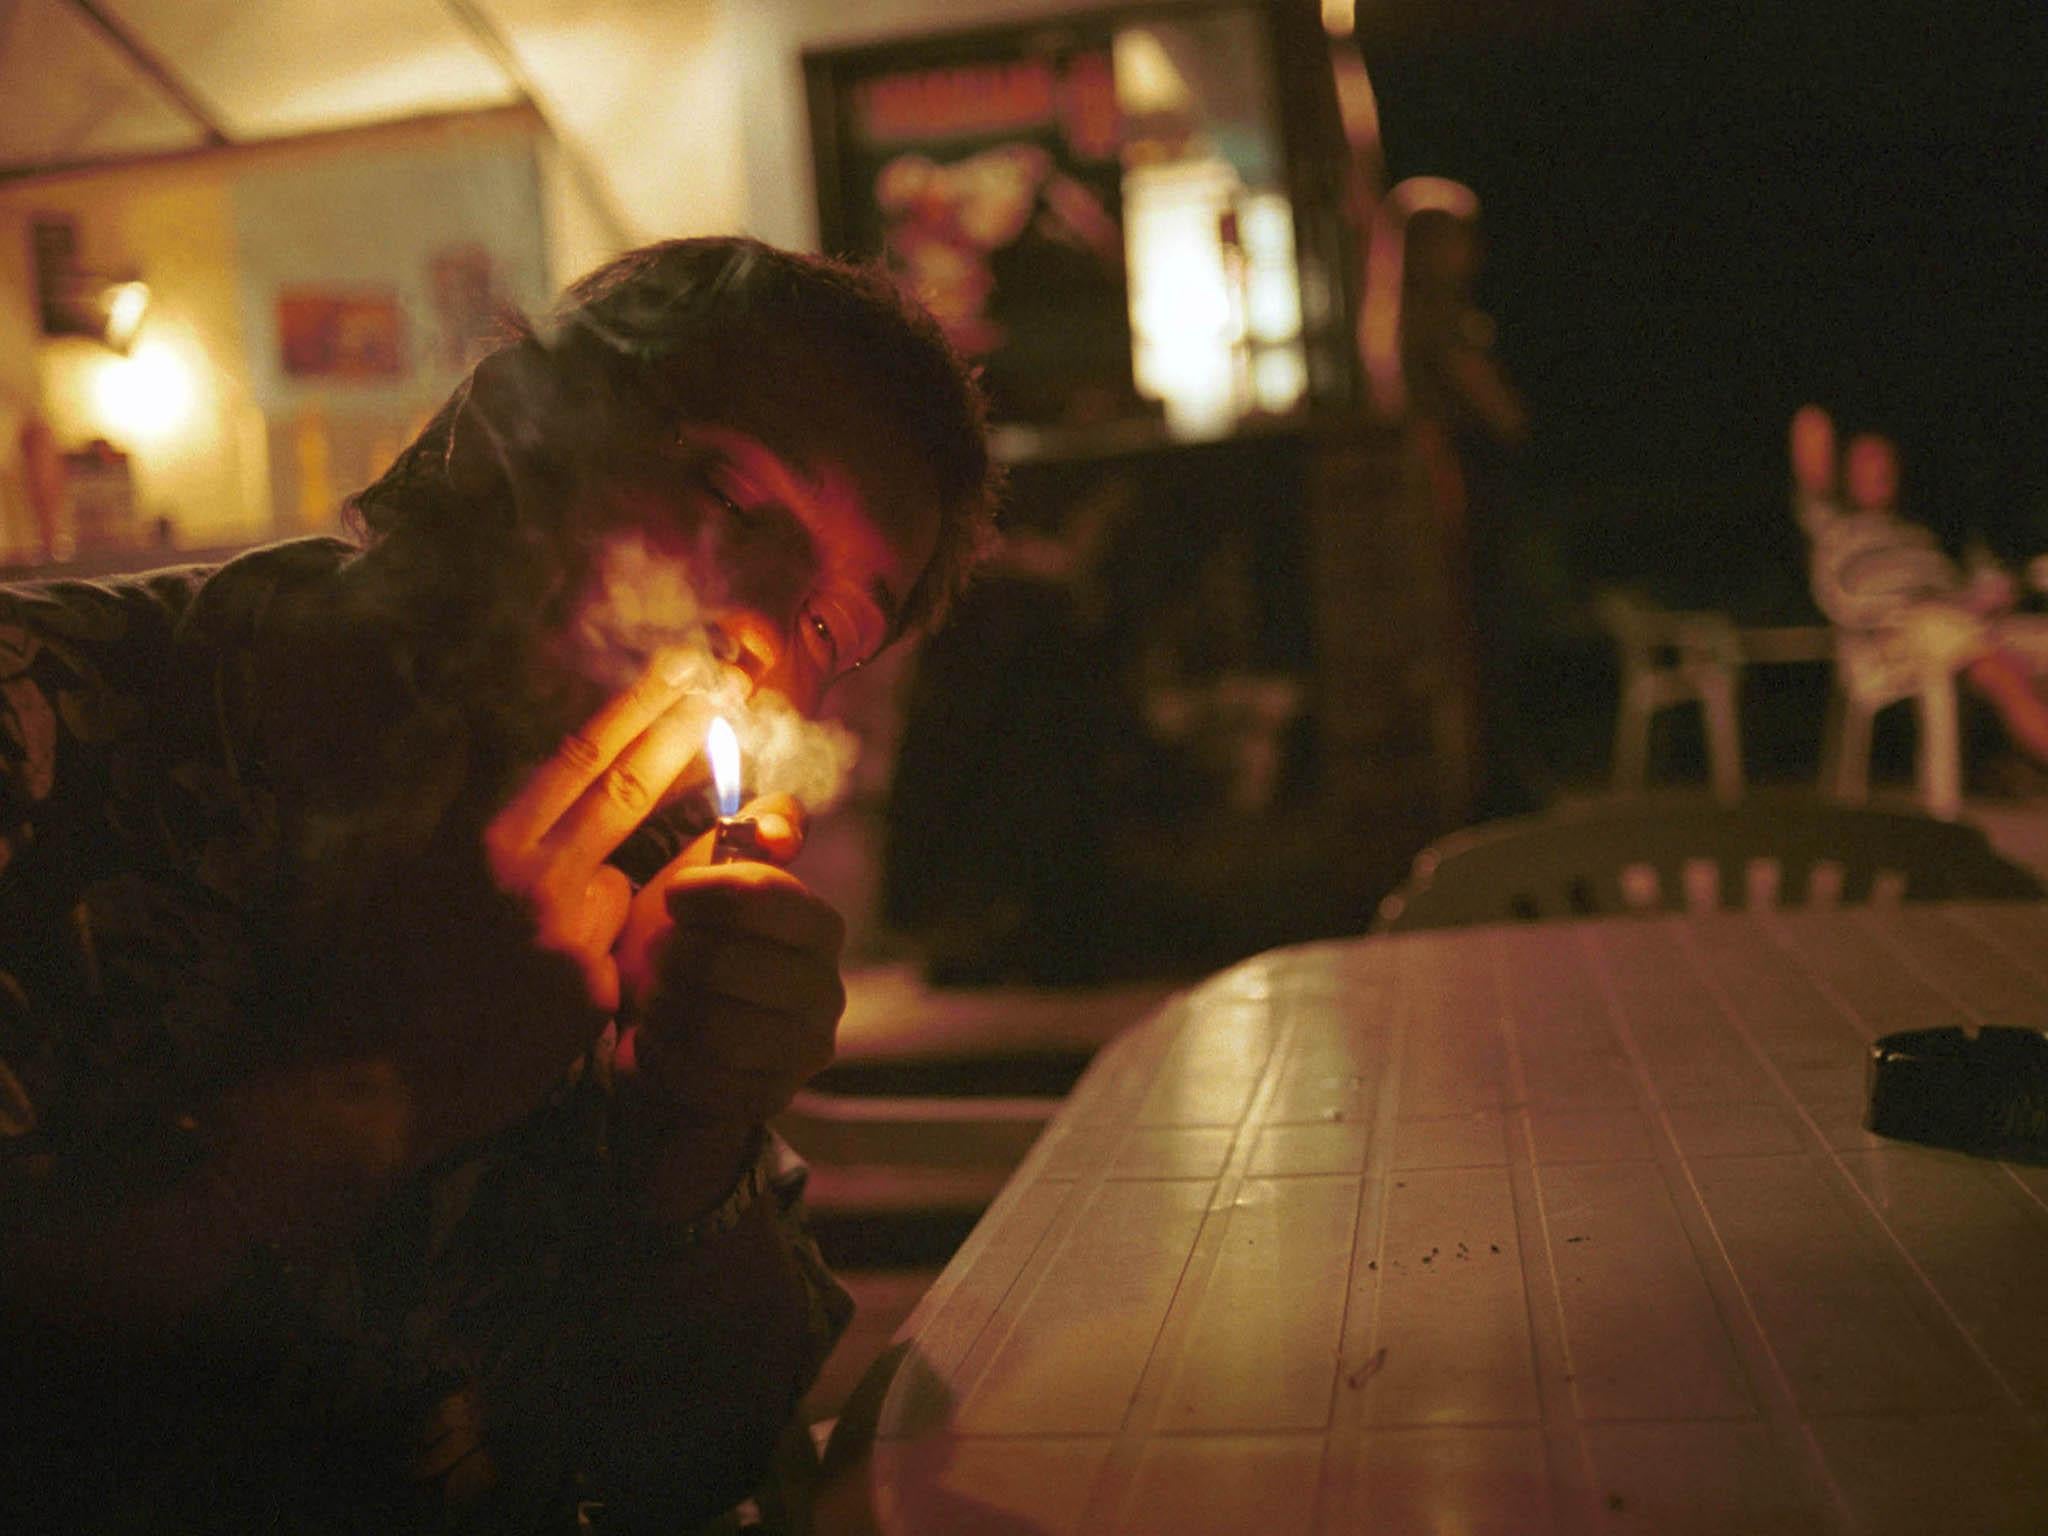 A student smokes marijuana at a café in Sofia, Bulgaria. Smoking in public is not uncommon in the nation’s capital